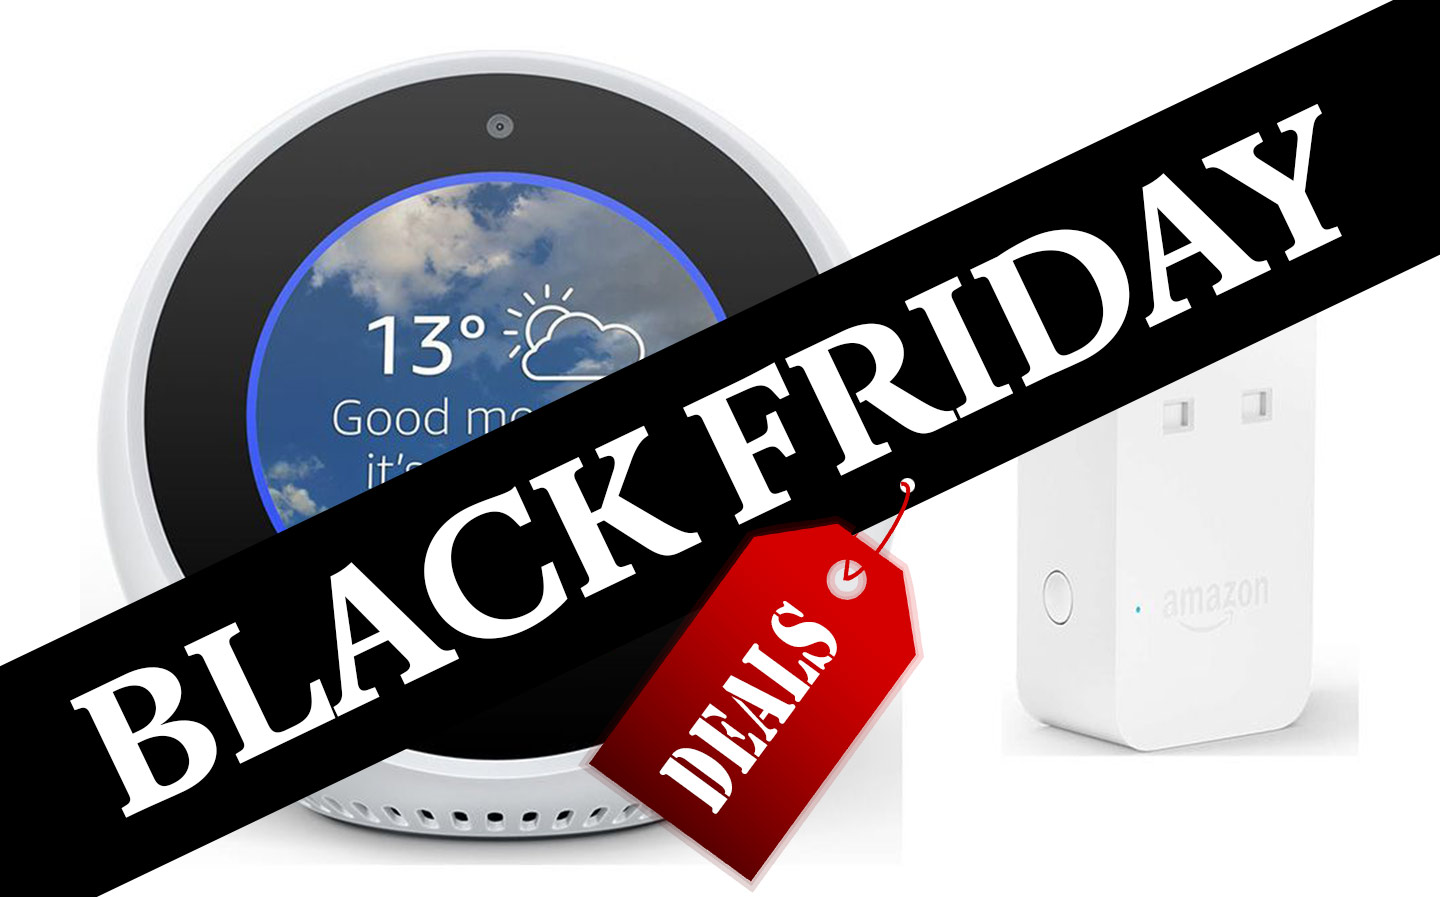 Black Friday smart home and smart speaker deals and discounts